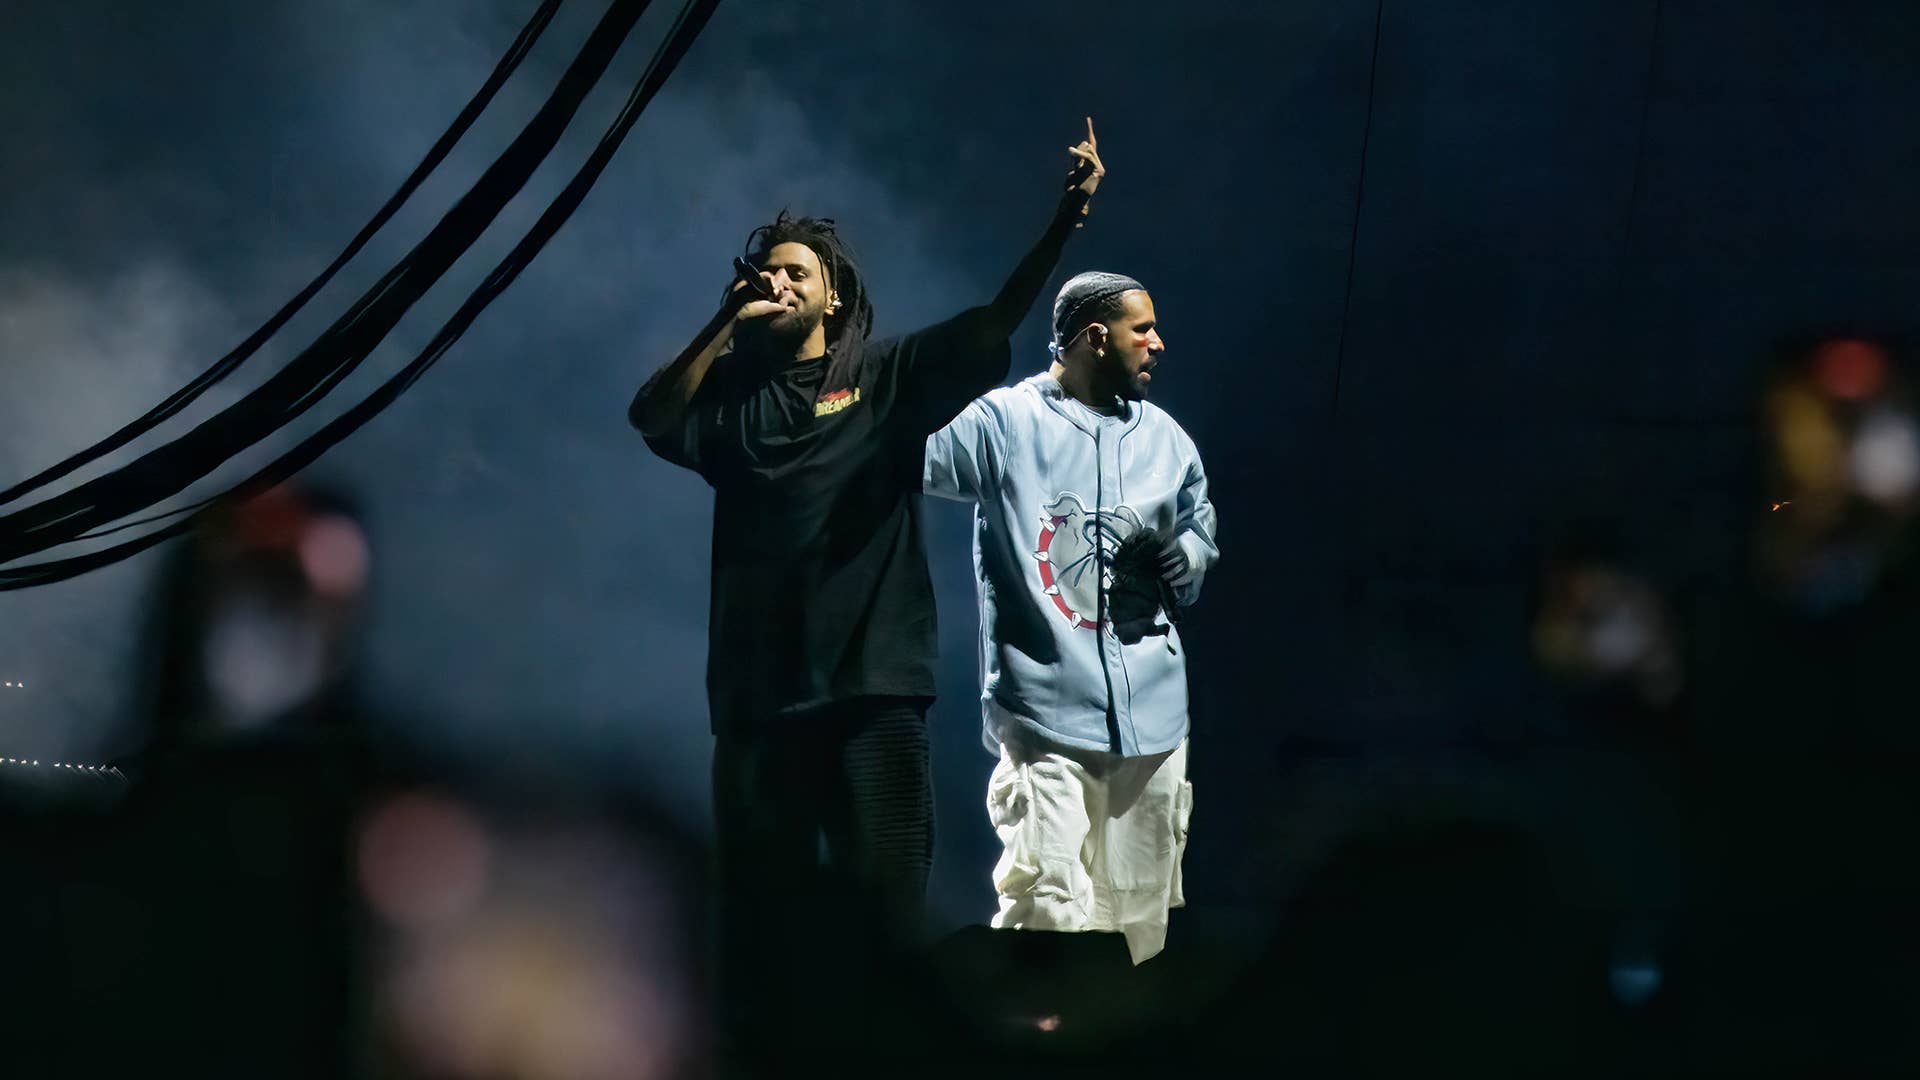 J. Cole (L) and Drake (R) perform during the Dreamville Festival at Dorothea Dix Park